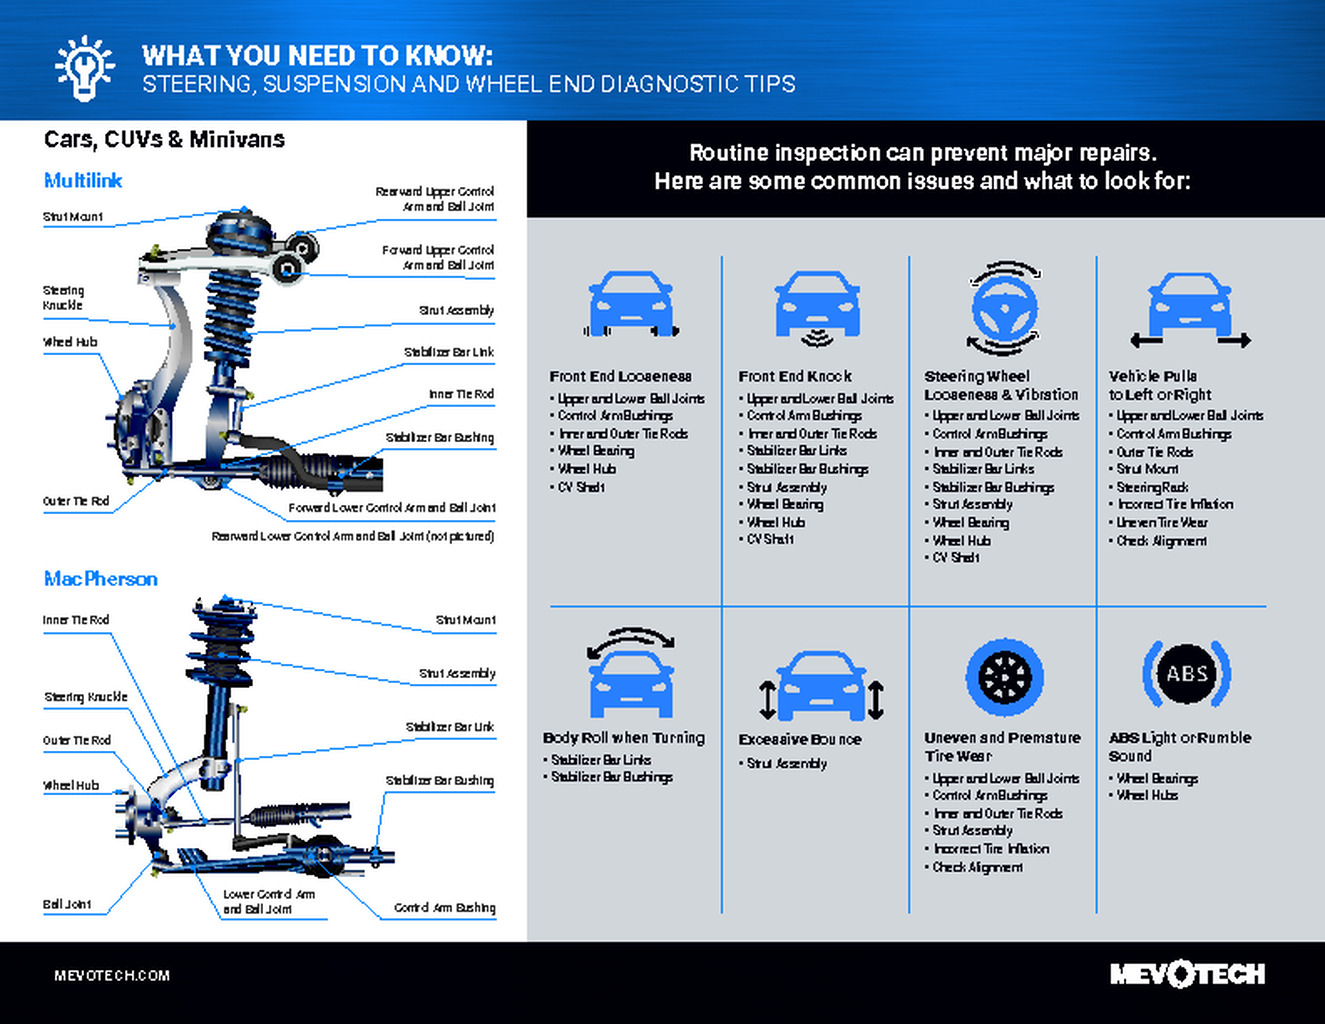 WHAT YOU NEED TO KNOW: STEERING, SUSPENSION AND WHEEL END DIAGNOSTIC TIPS